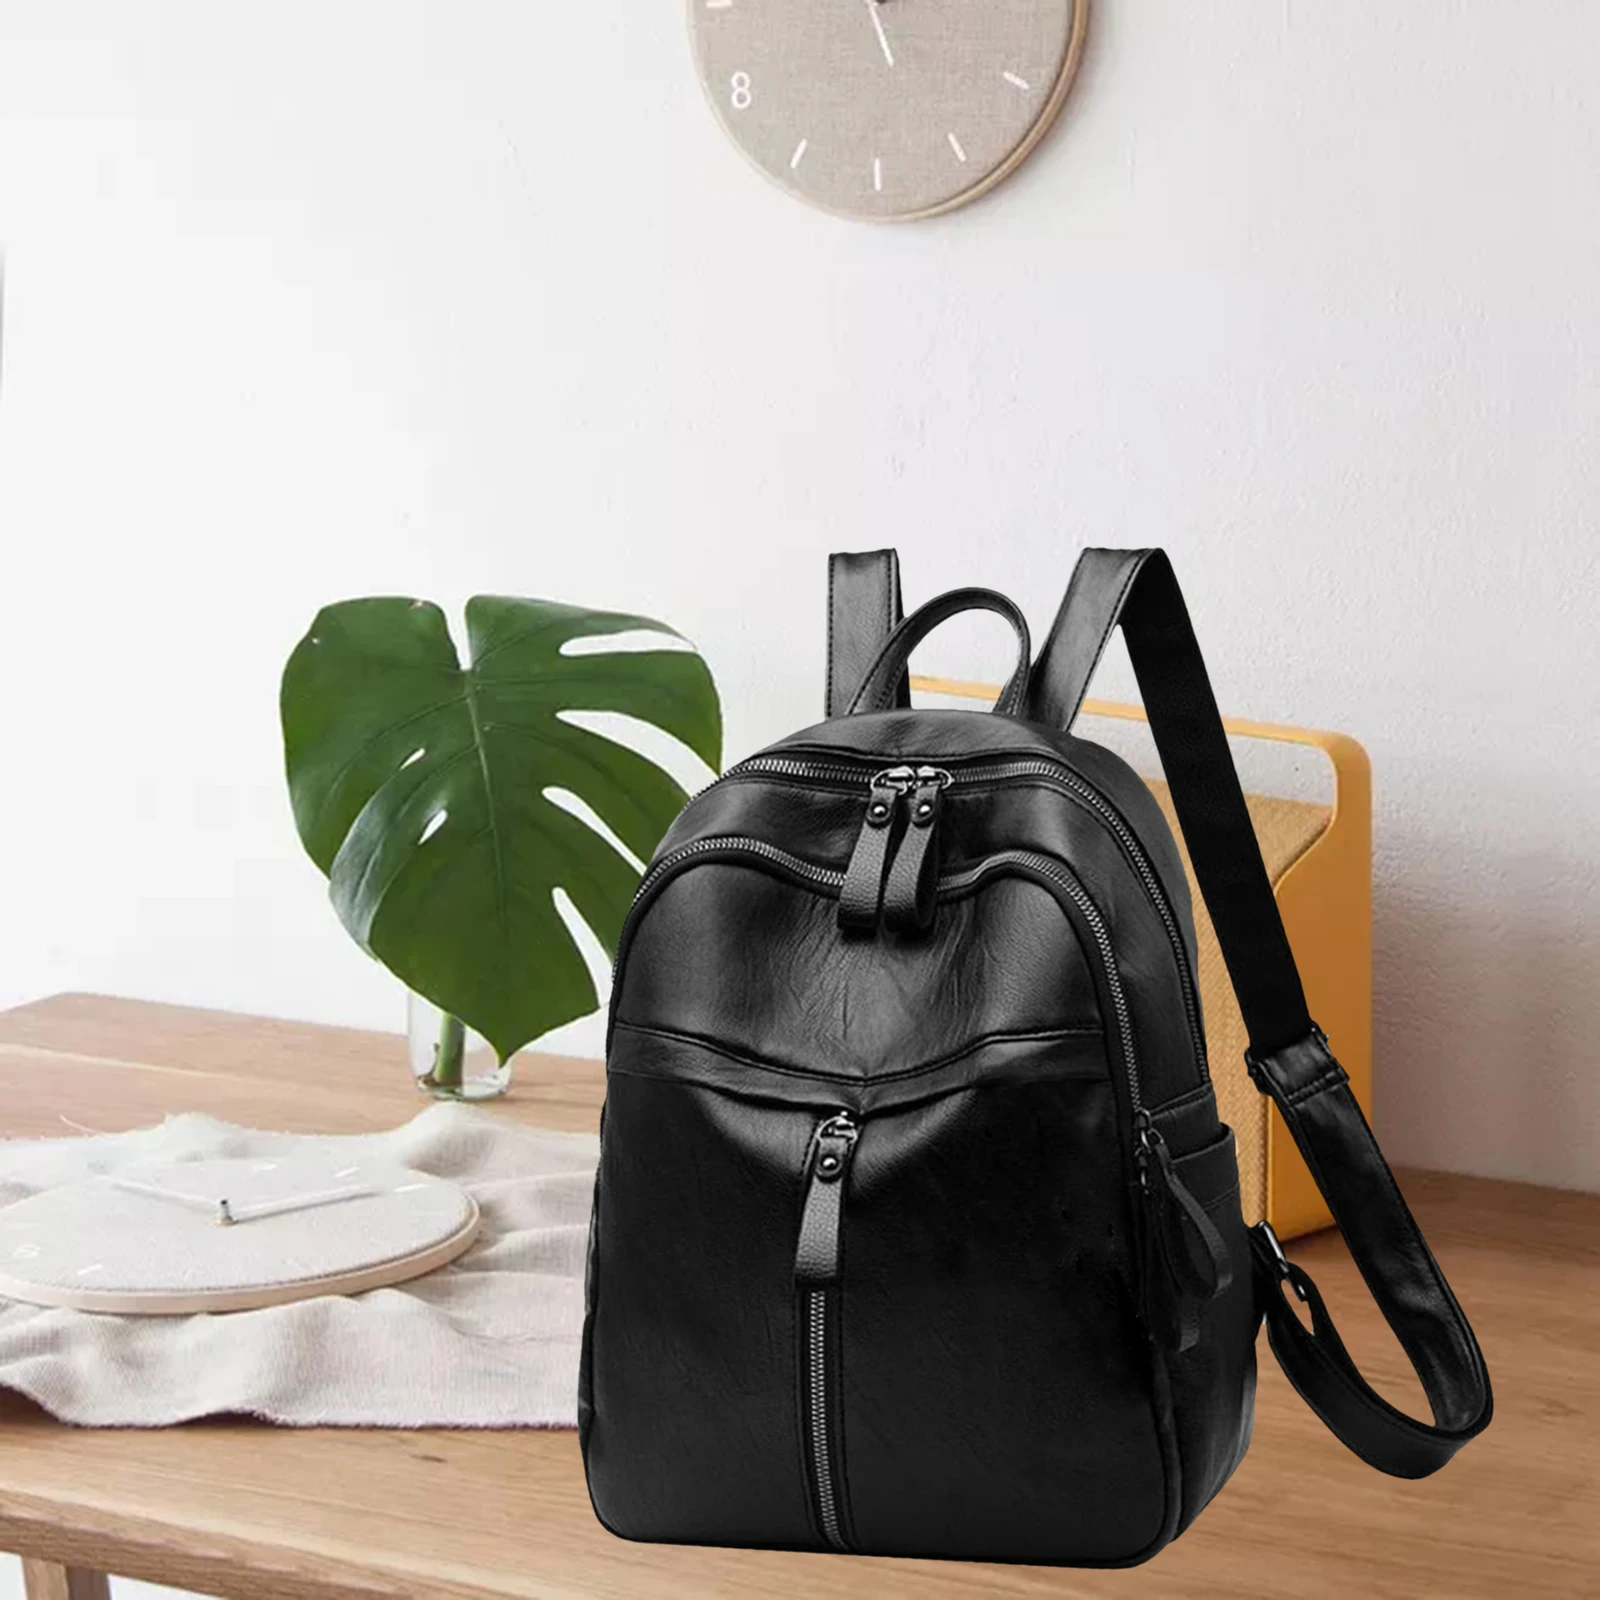 Cute Women Backpack PU Leather Travel Casual Purse Schoolbag Small Tote